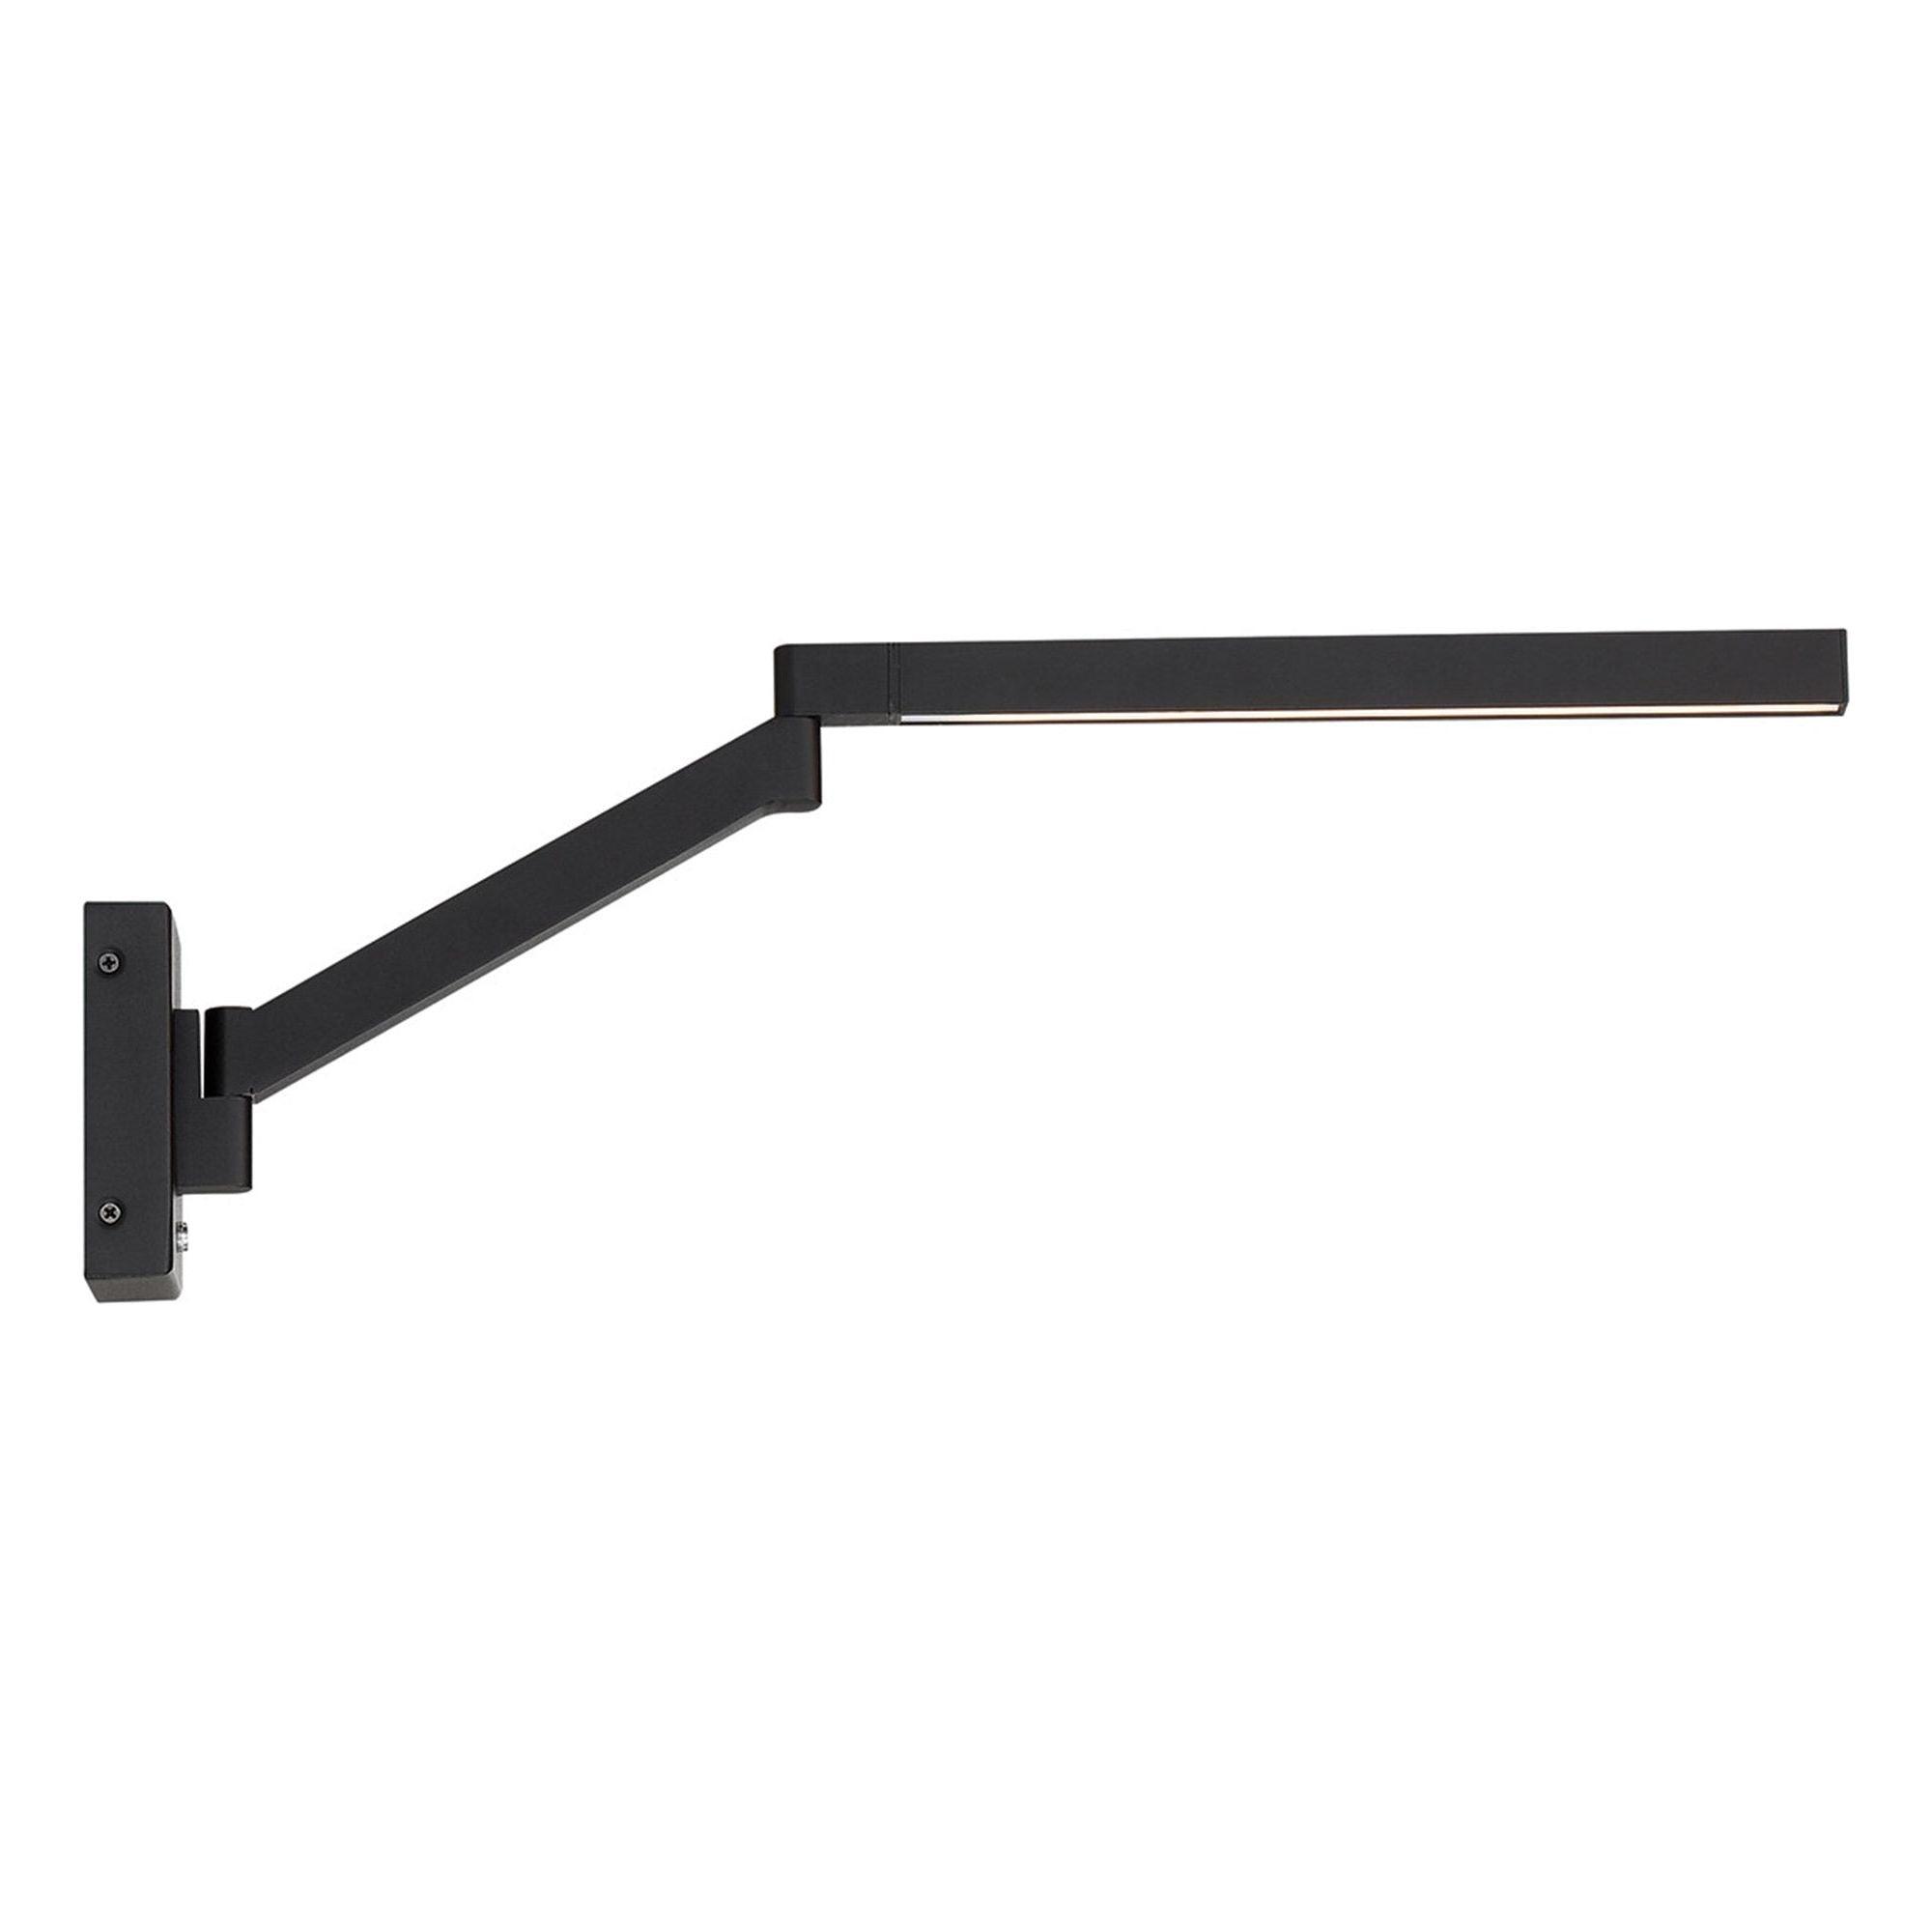 Modern Forms - Beam 22" LED Swing Arm - Lights Canada